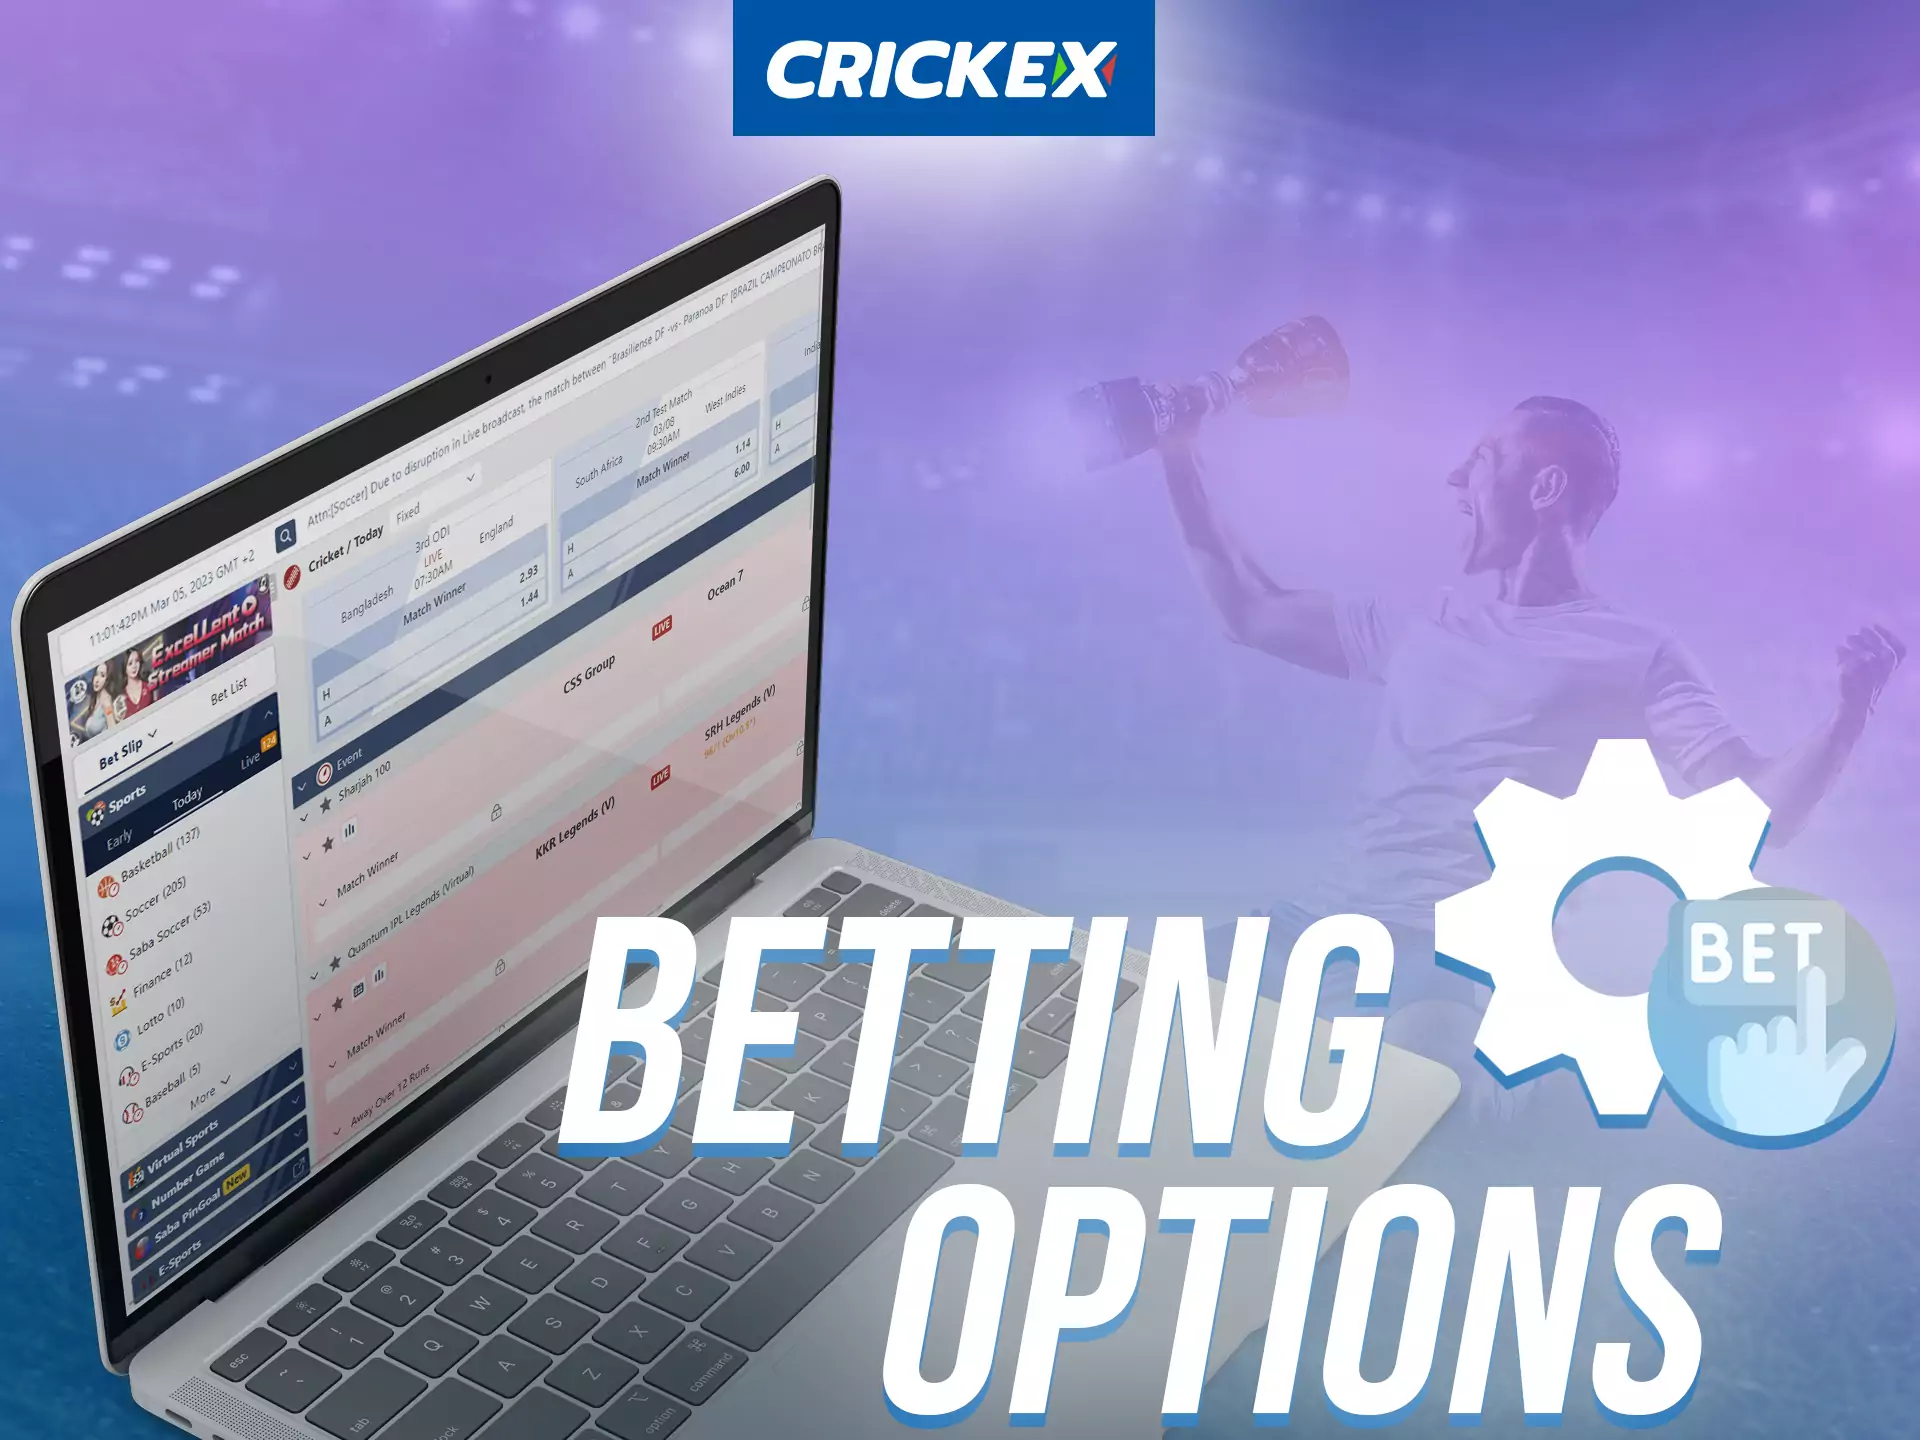 Crickex has various options for sports betting.